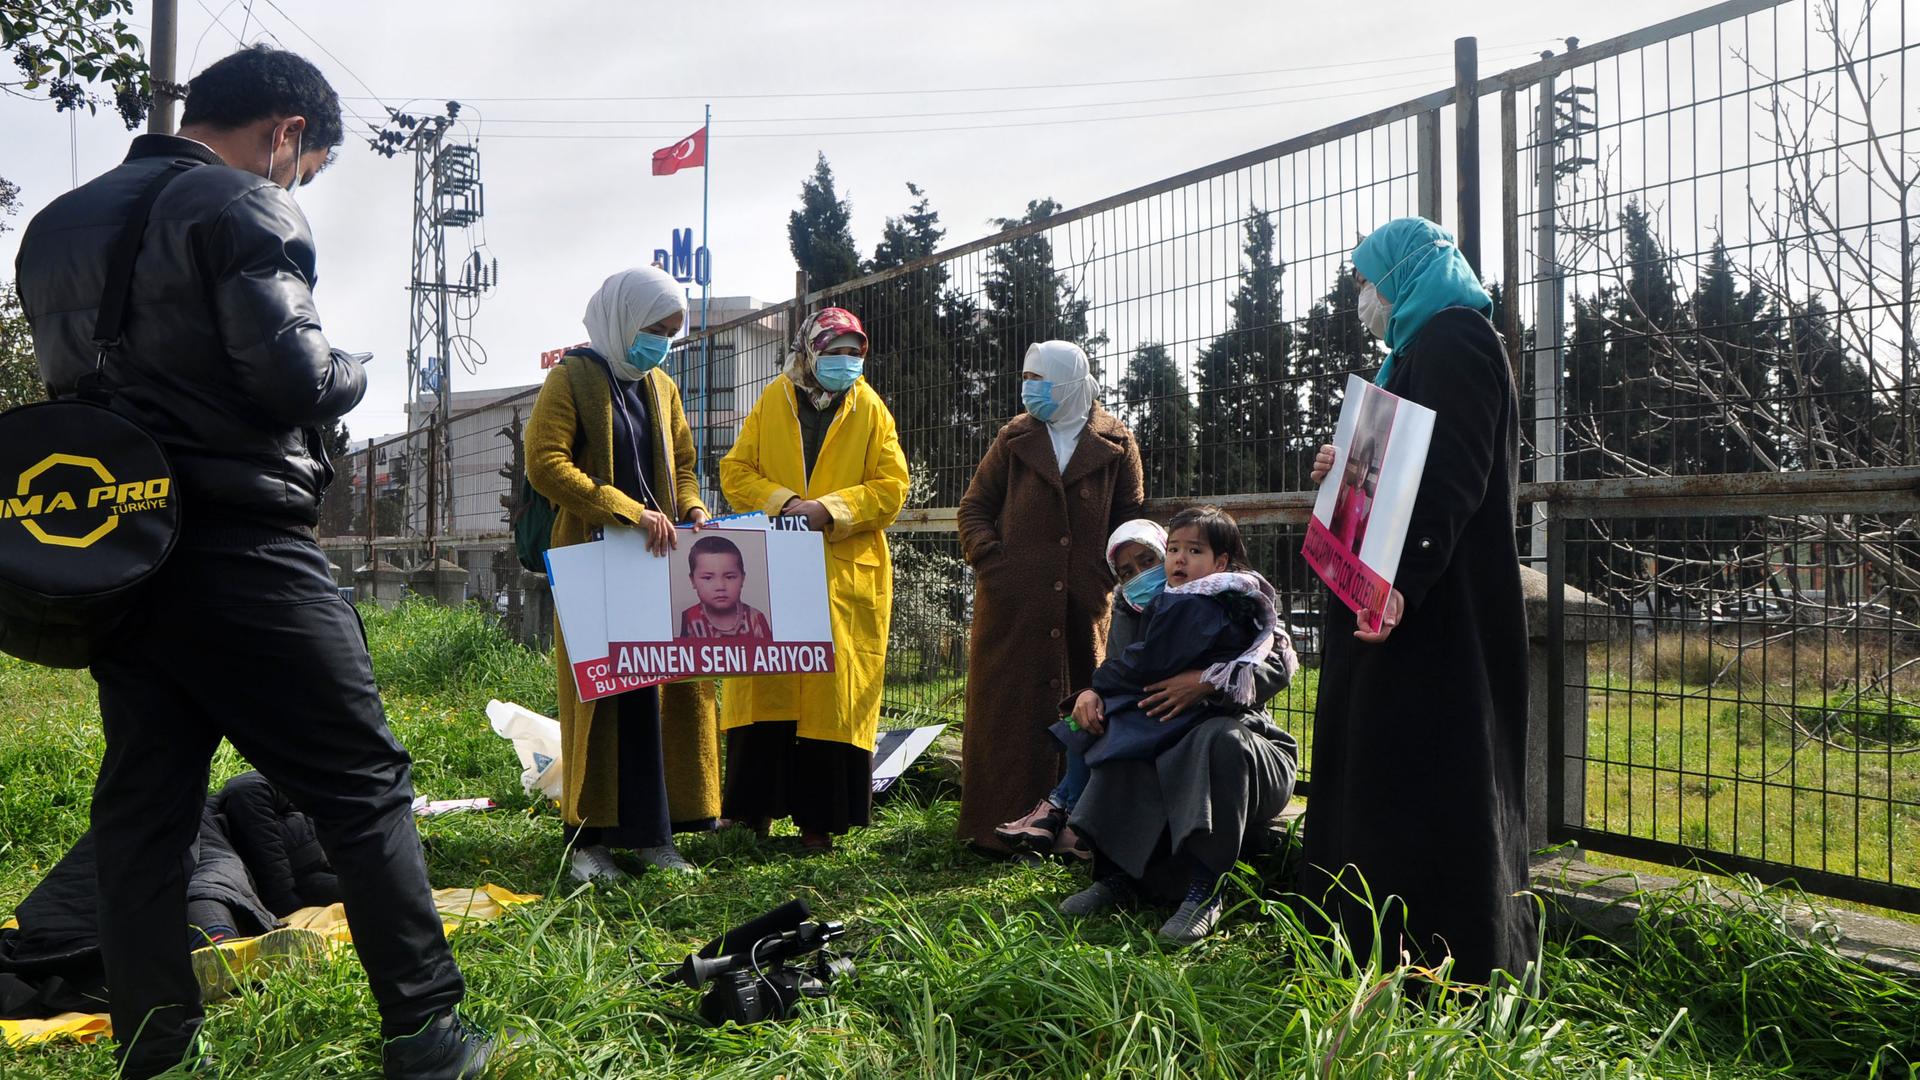 A group of Uyghur mothers are trying to get the Turkish government to help find their missing children in China. The women set out on foot from Istanbul to Ankara, the capital of Turkey, to demonstrate, and say they will continue to wait there until offic